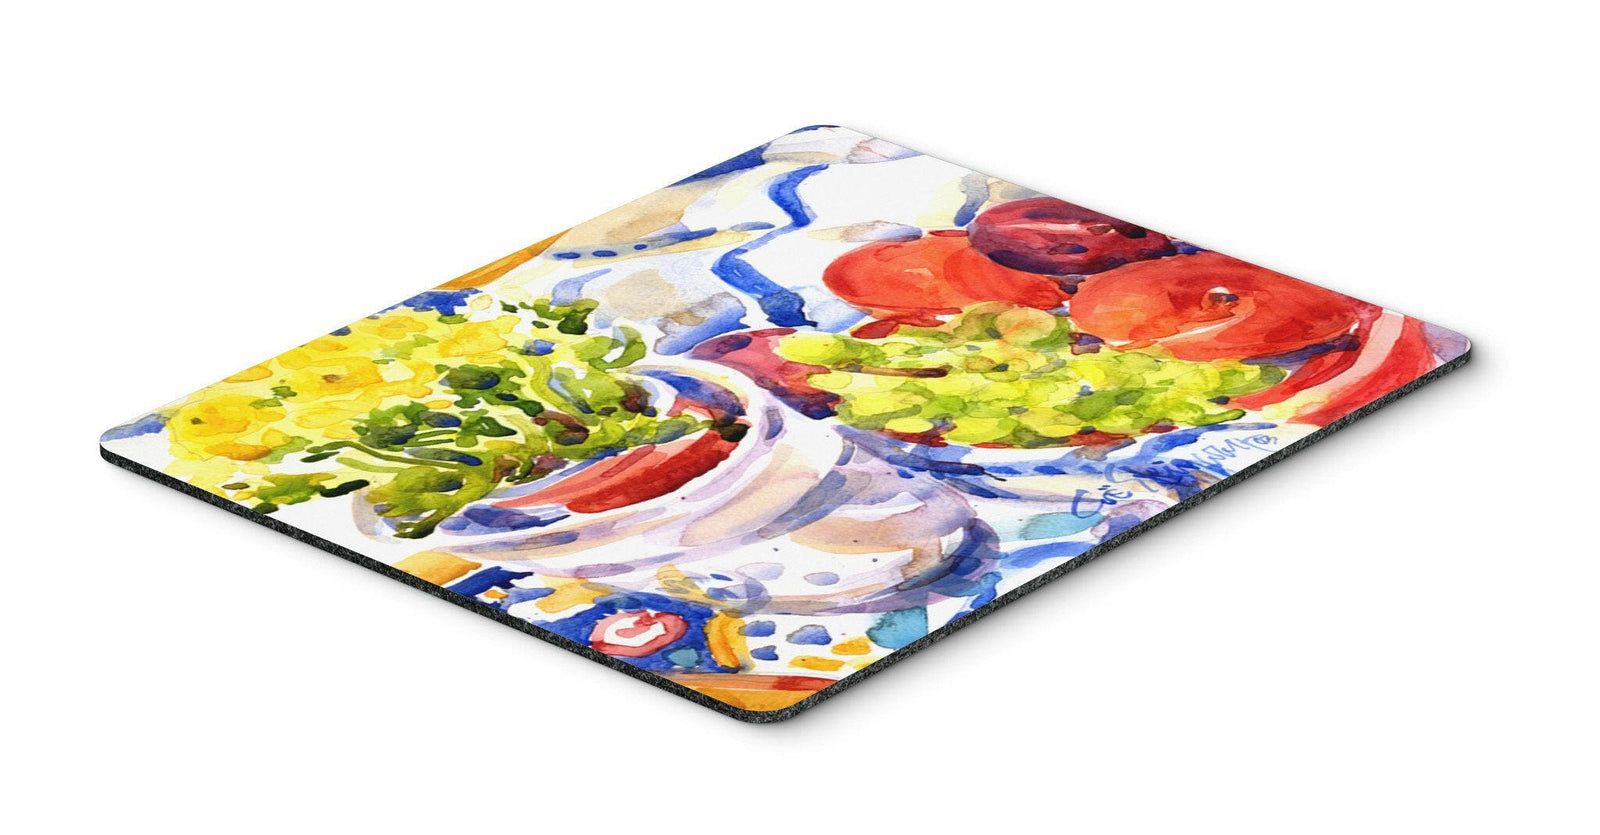 Apples, Plums and Grapes with Flowers  Mouse pad, hot pad, or trivet by Caroline's Treasures